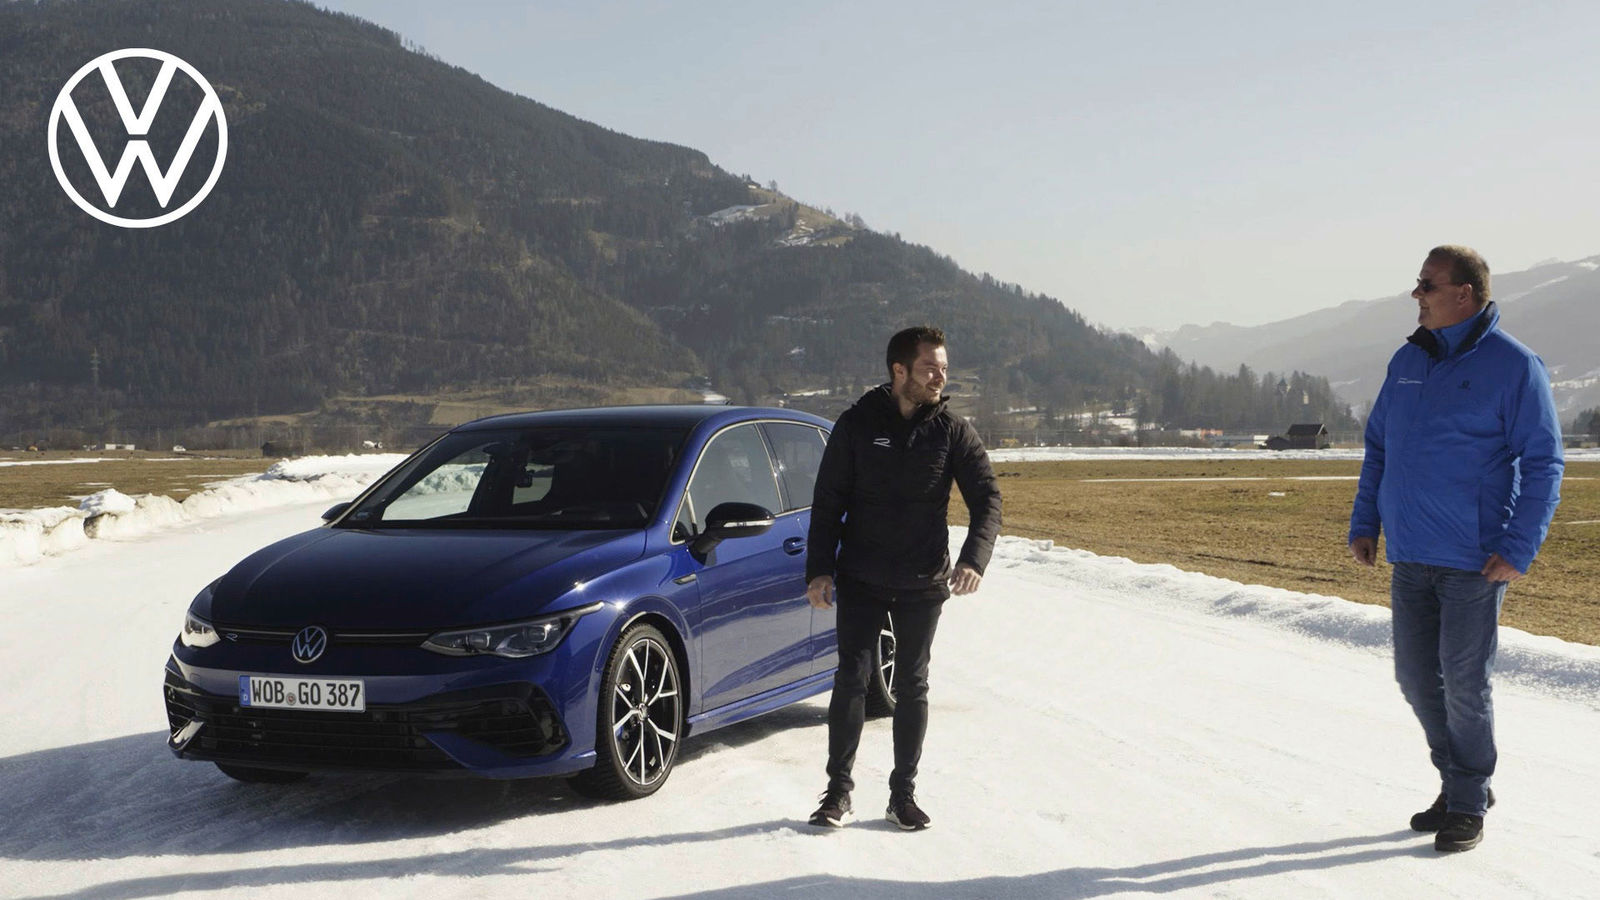 Winter tips: Volkswagen’s how-to guide for the cold season